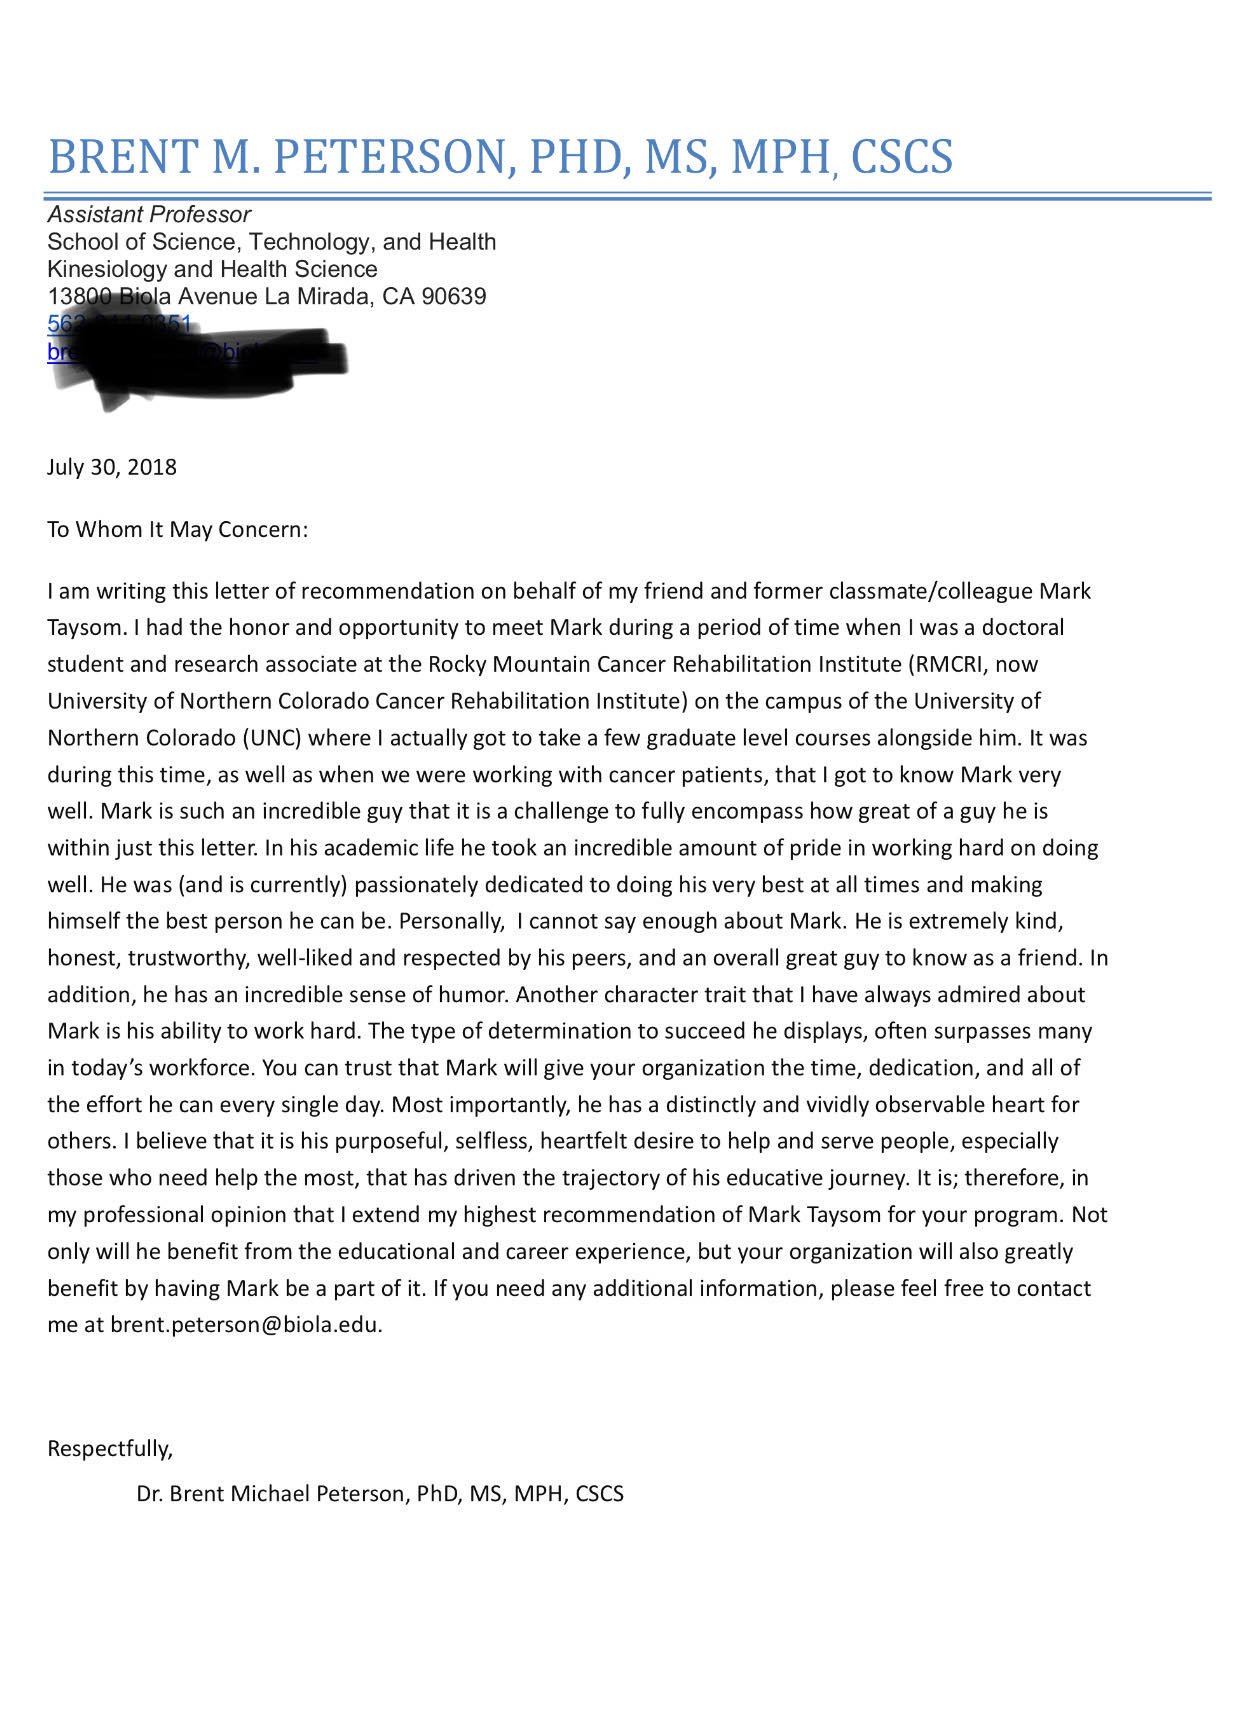 Dr. Brent Peterson Letter of Rec Blacked Out.jpg